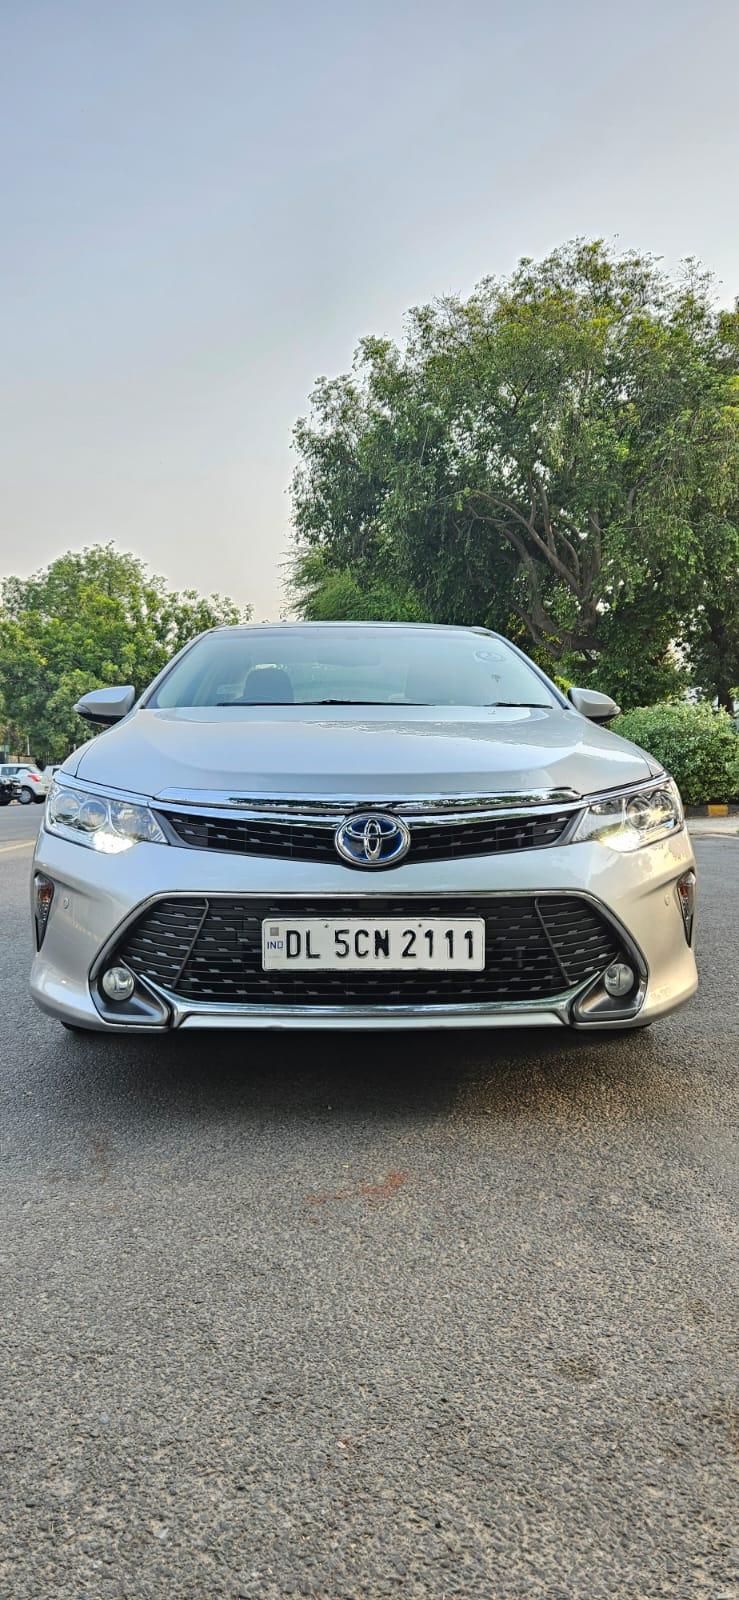 2016 Toyota Camry Hybrid BS IV Front View 